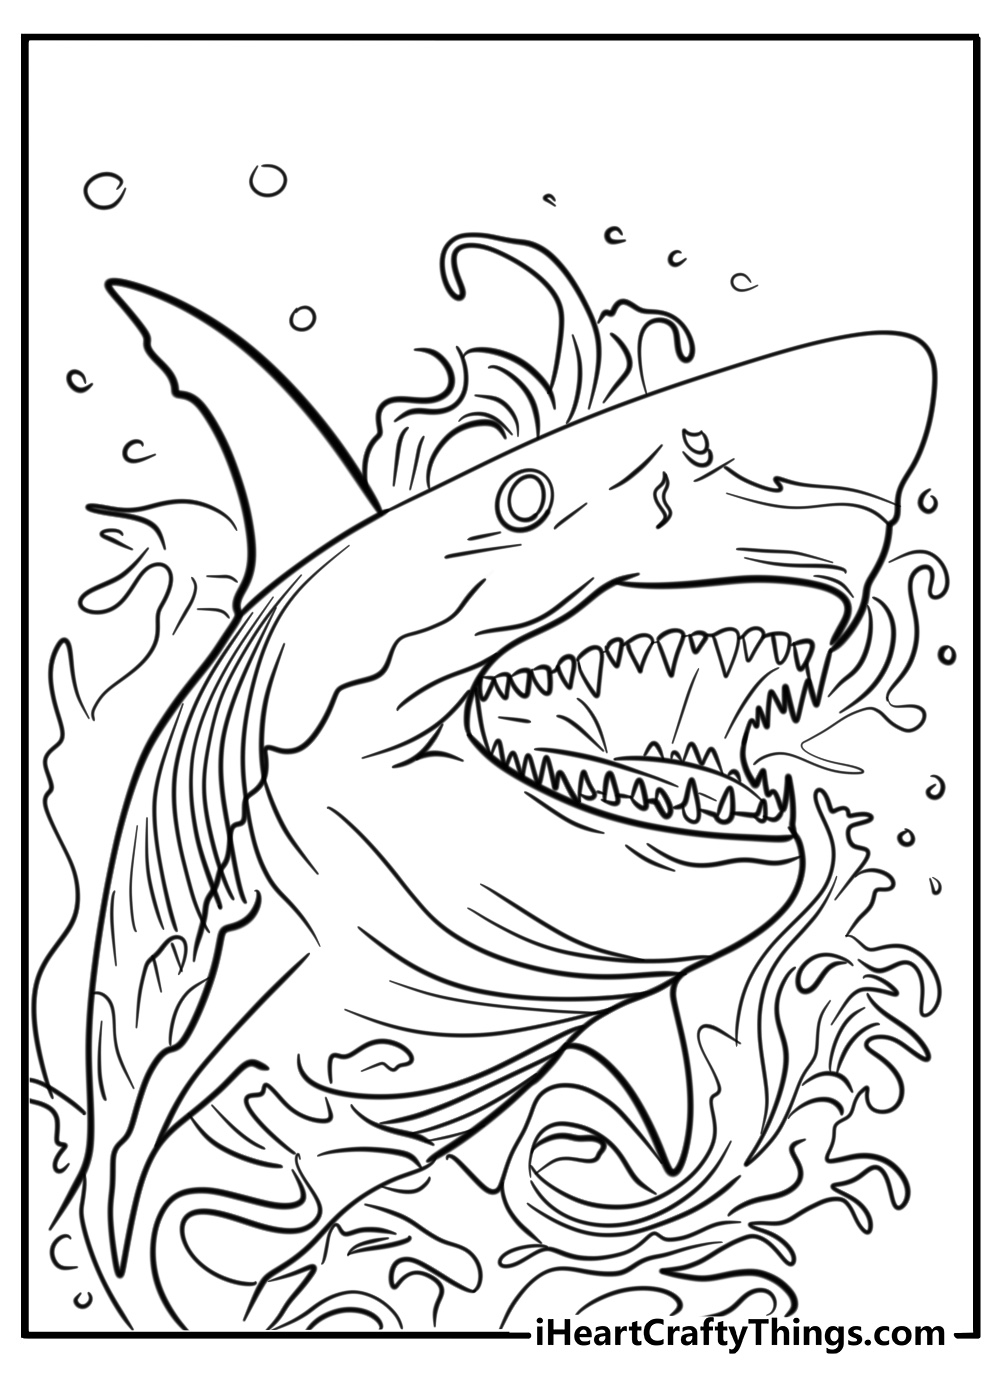 Close up of realistic great white shark coloring page